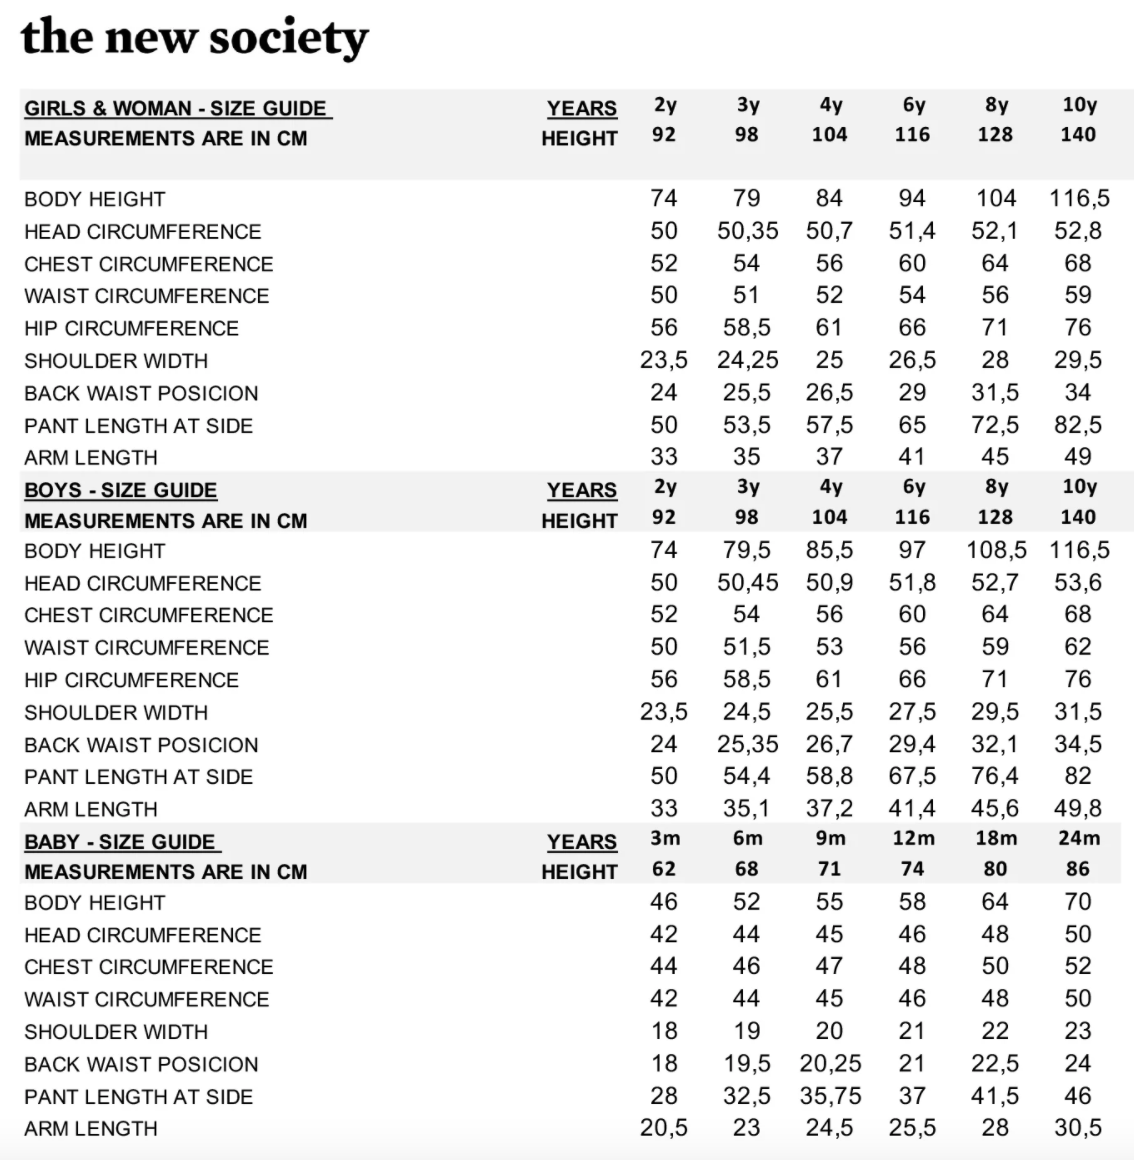 the new society size guide